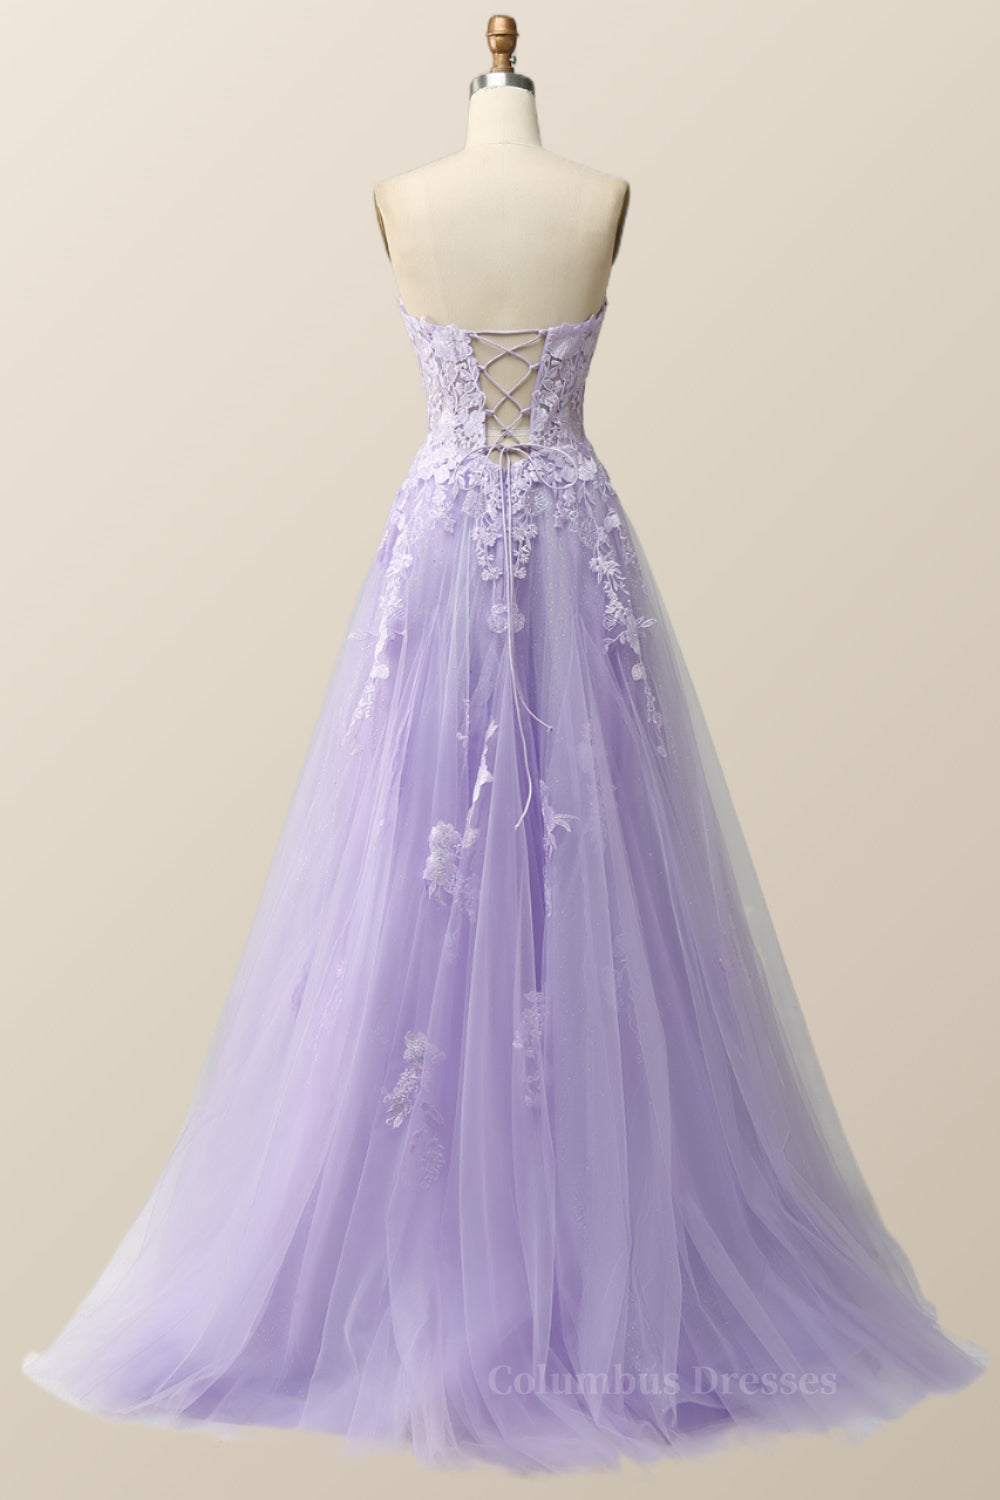 Prom Dress Yellow, Strapless Lavender and White Floral Embroidered Formal Dress